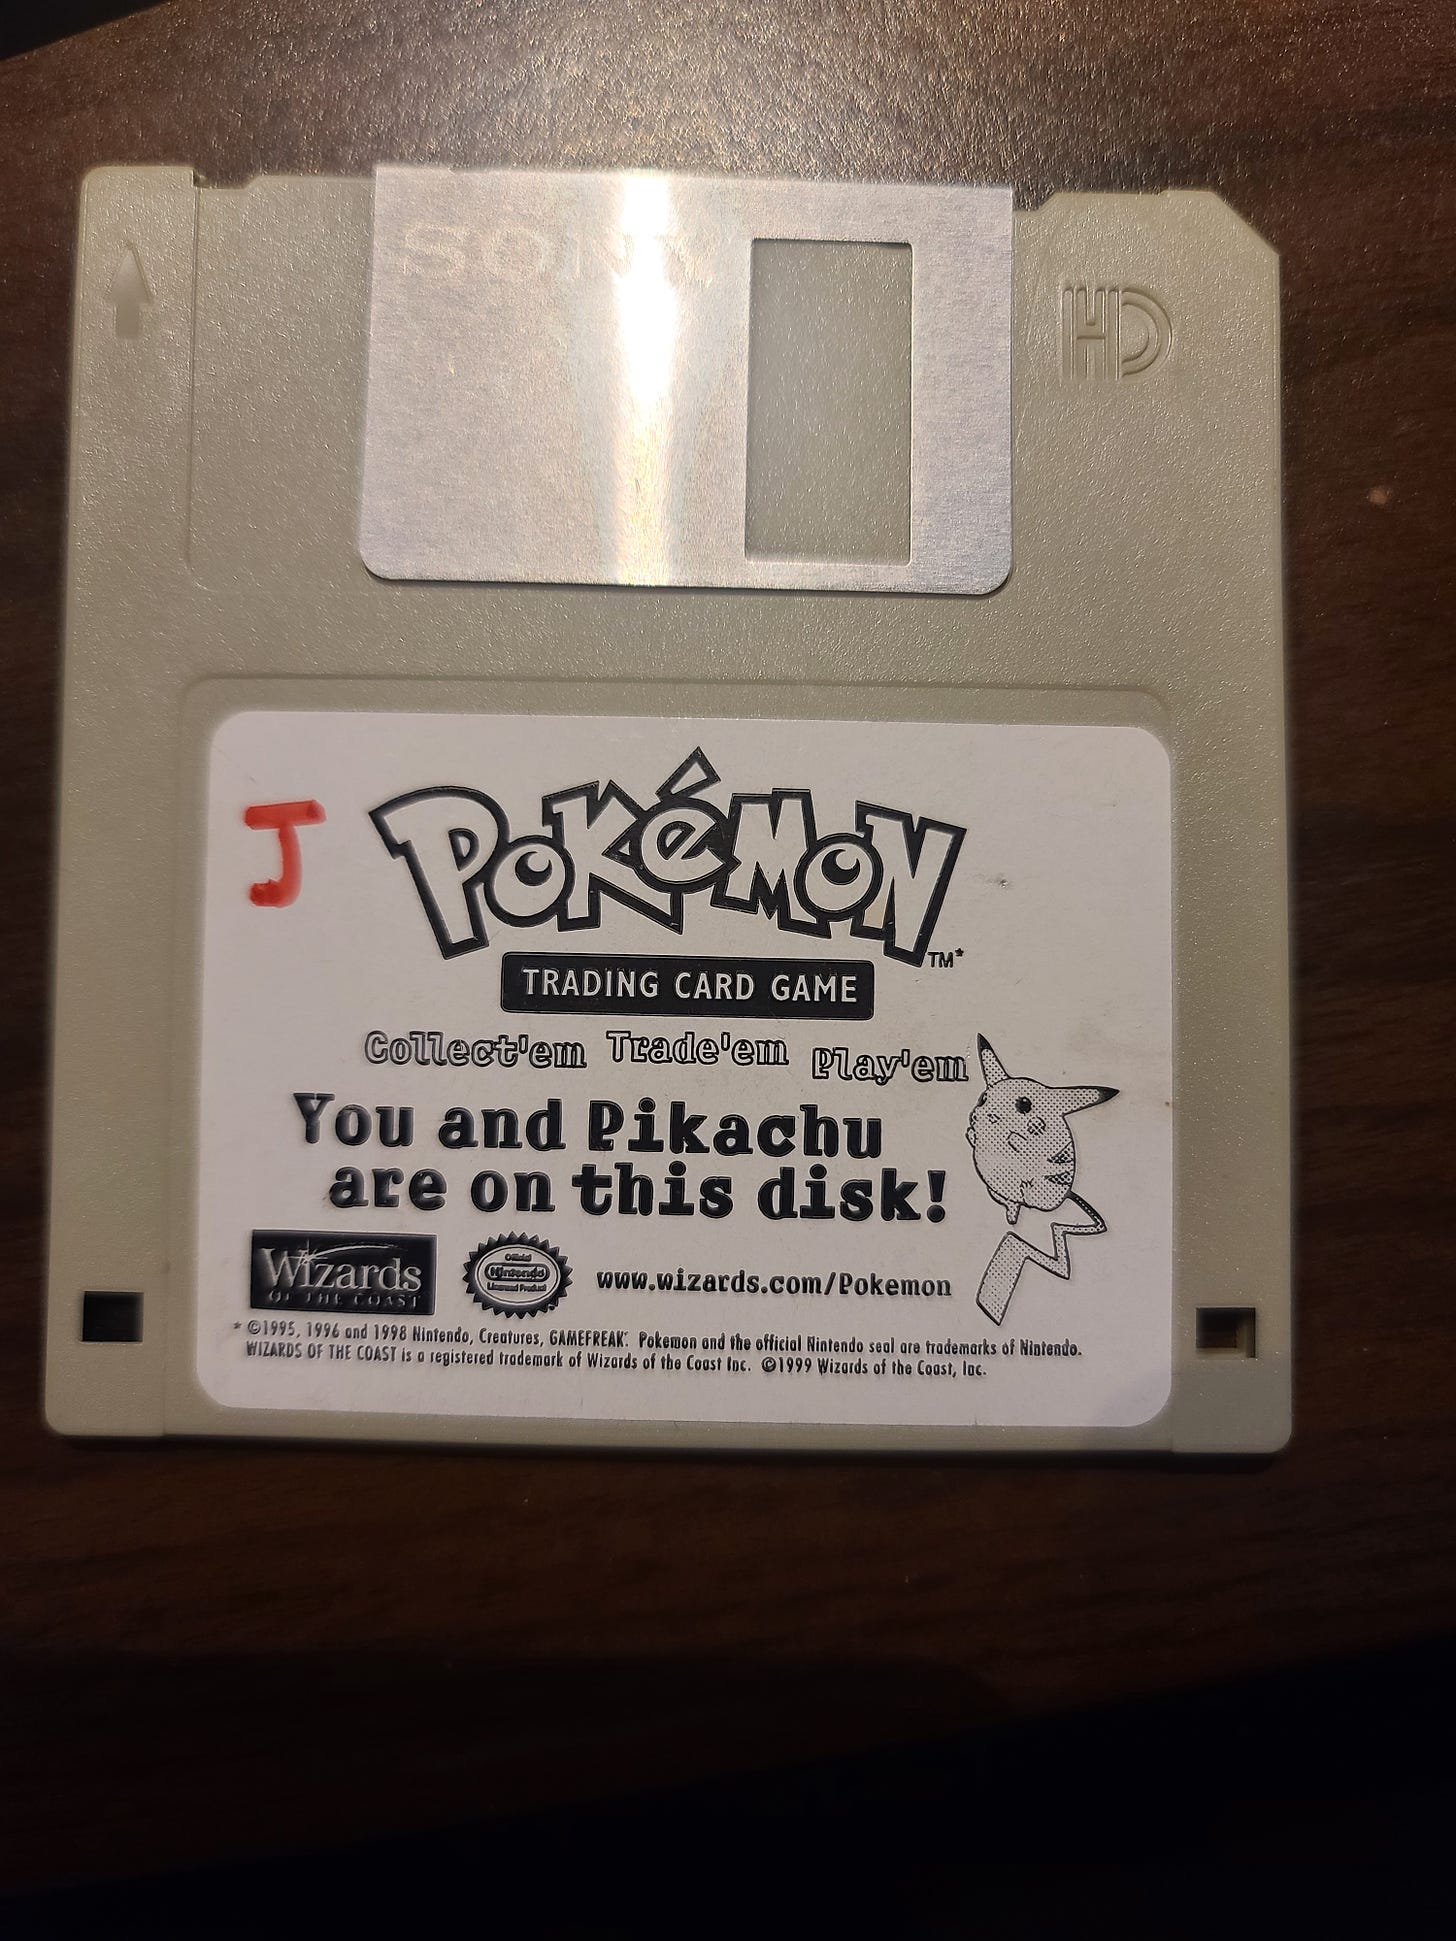 Here is a photograph of the floppy disk that Jim was given, containing a photograph of him standing next to a giant Pikachu card